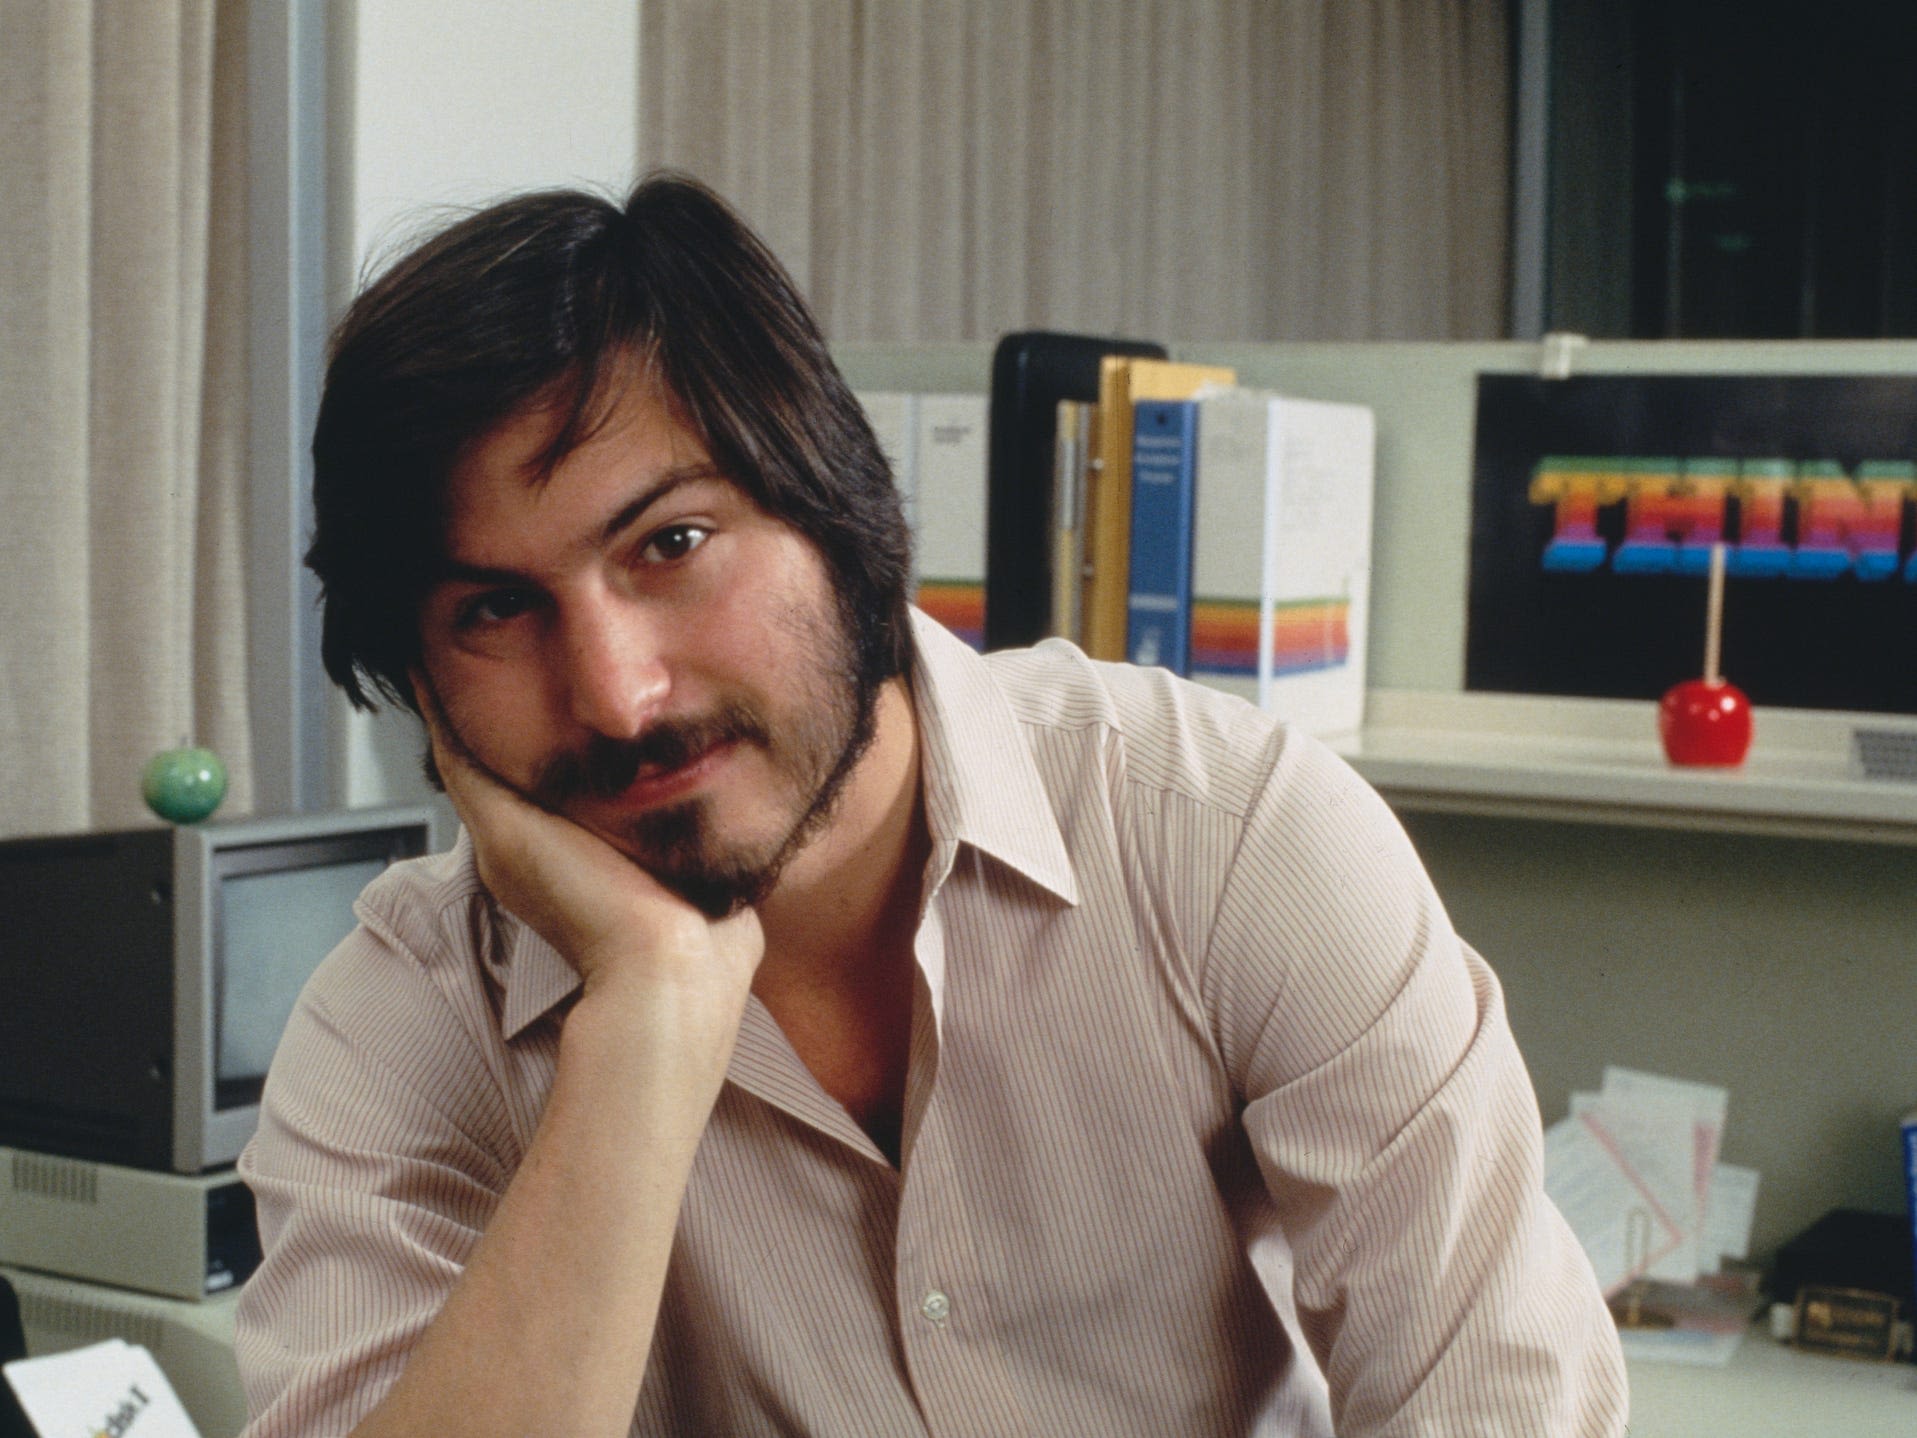 Steve Jobs predicted ChatGPT over 40 years ago, newly released footage reveals